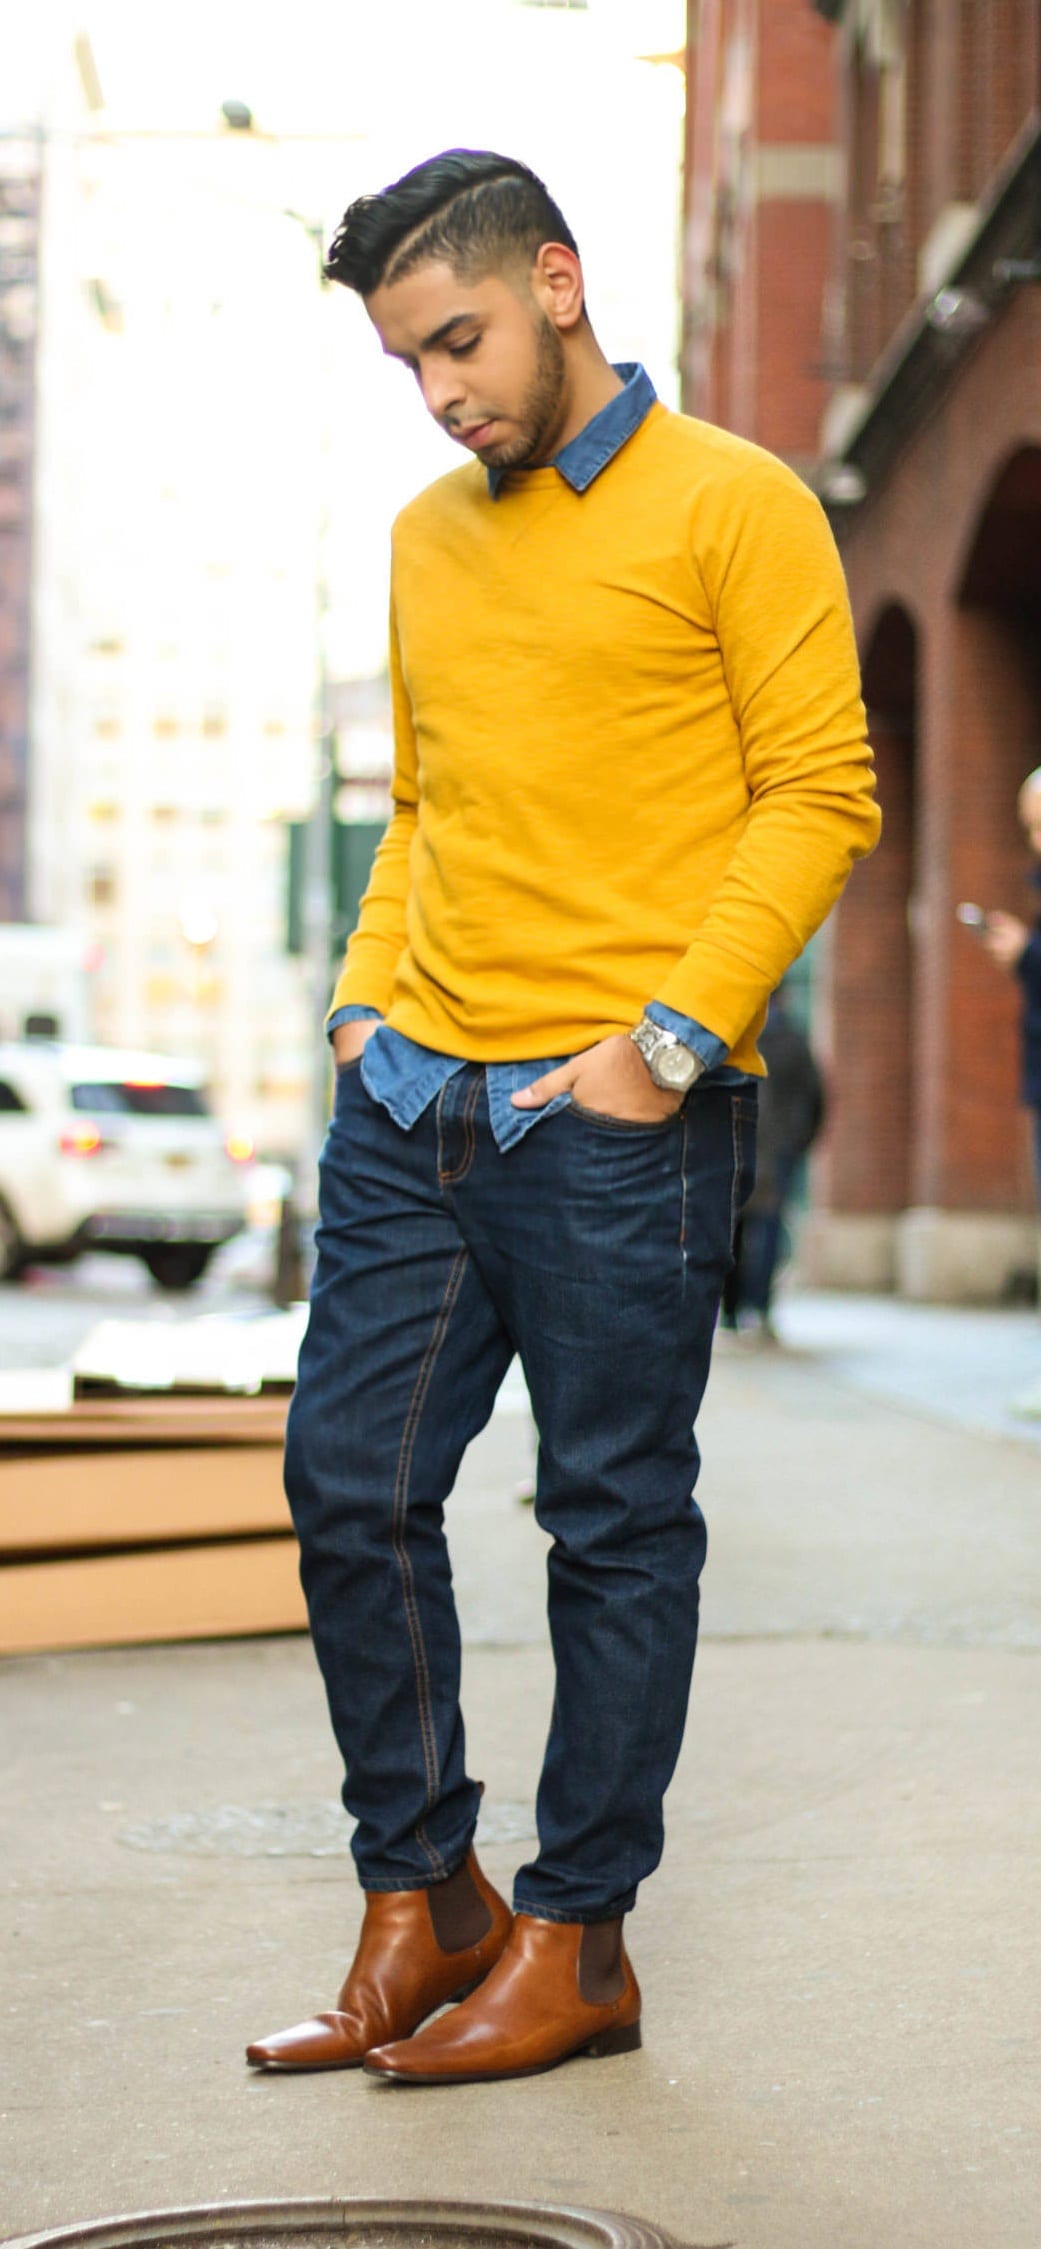 Denim Undershirt, Mustard Yellow Sweater and Denim Jeans outfit